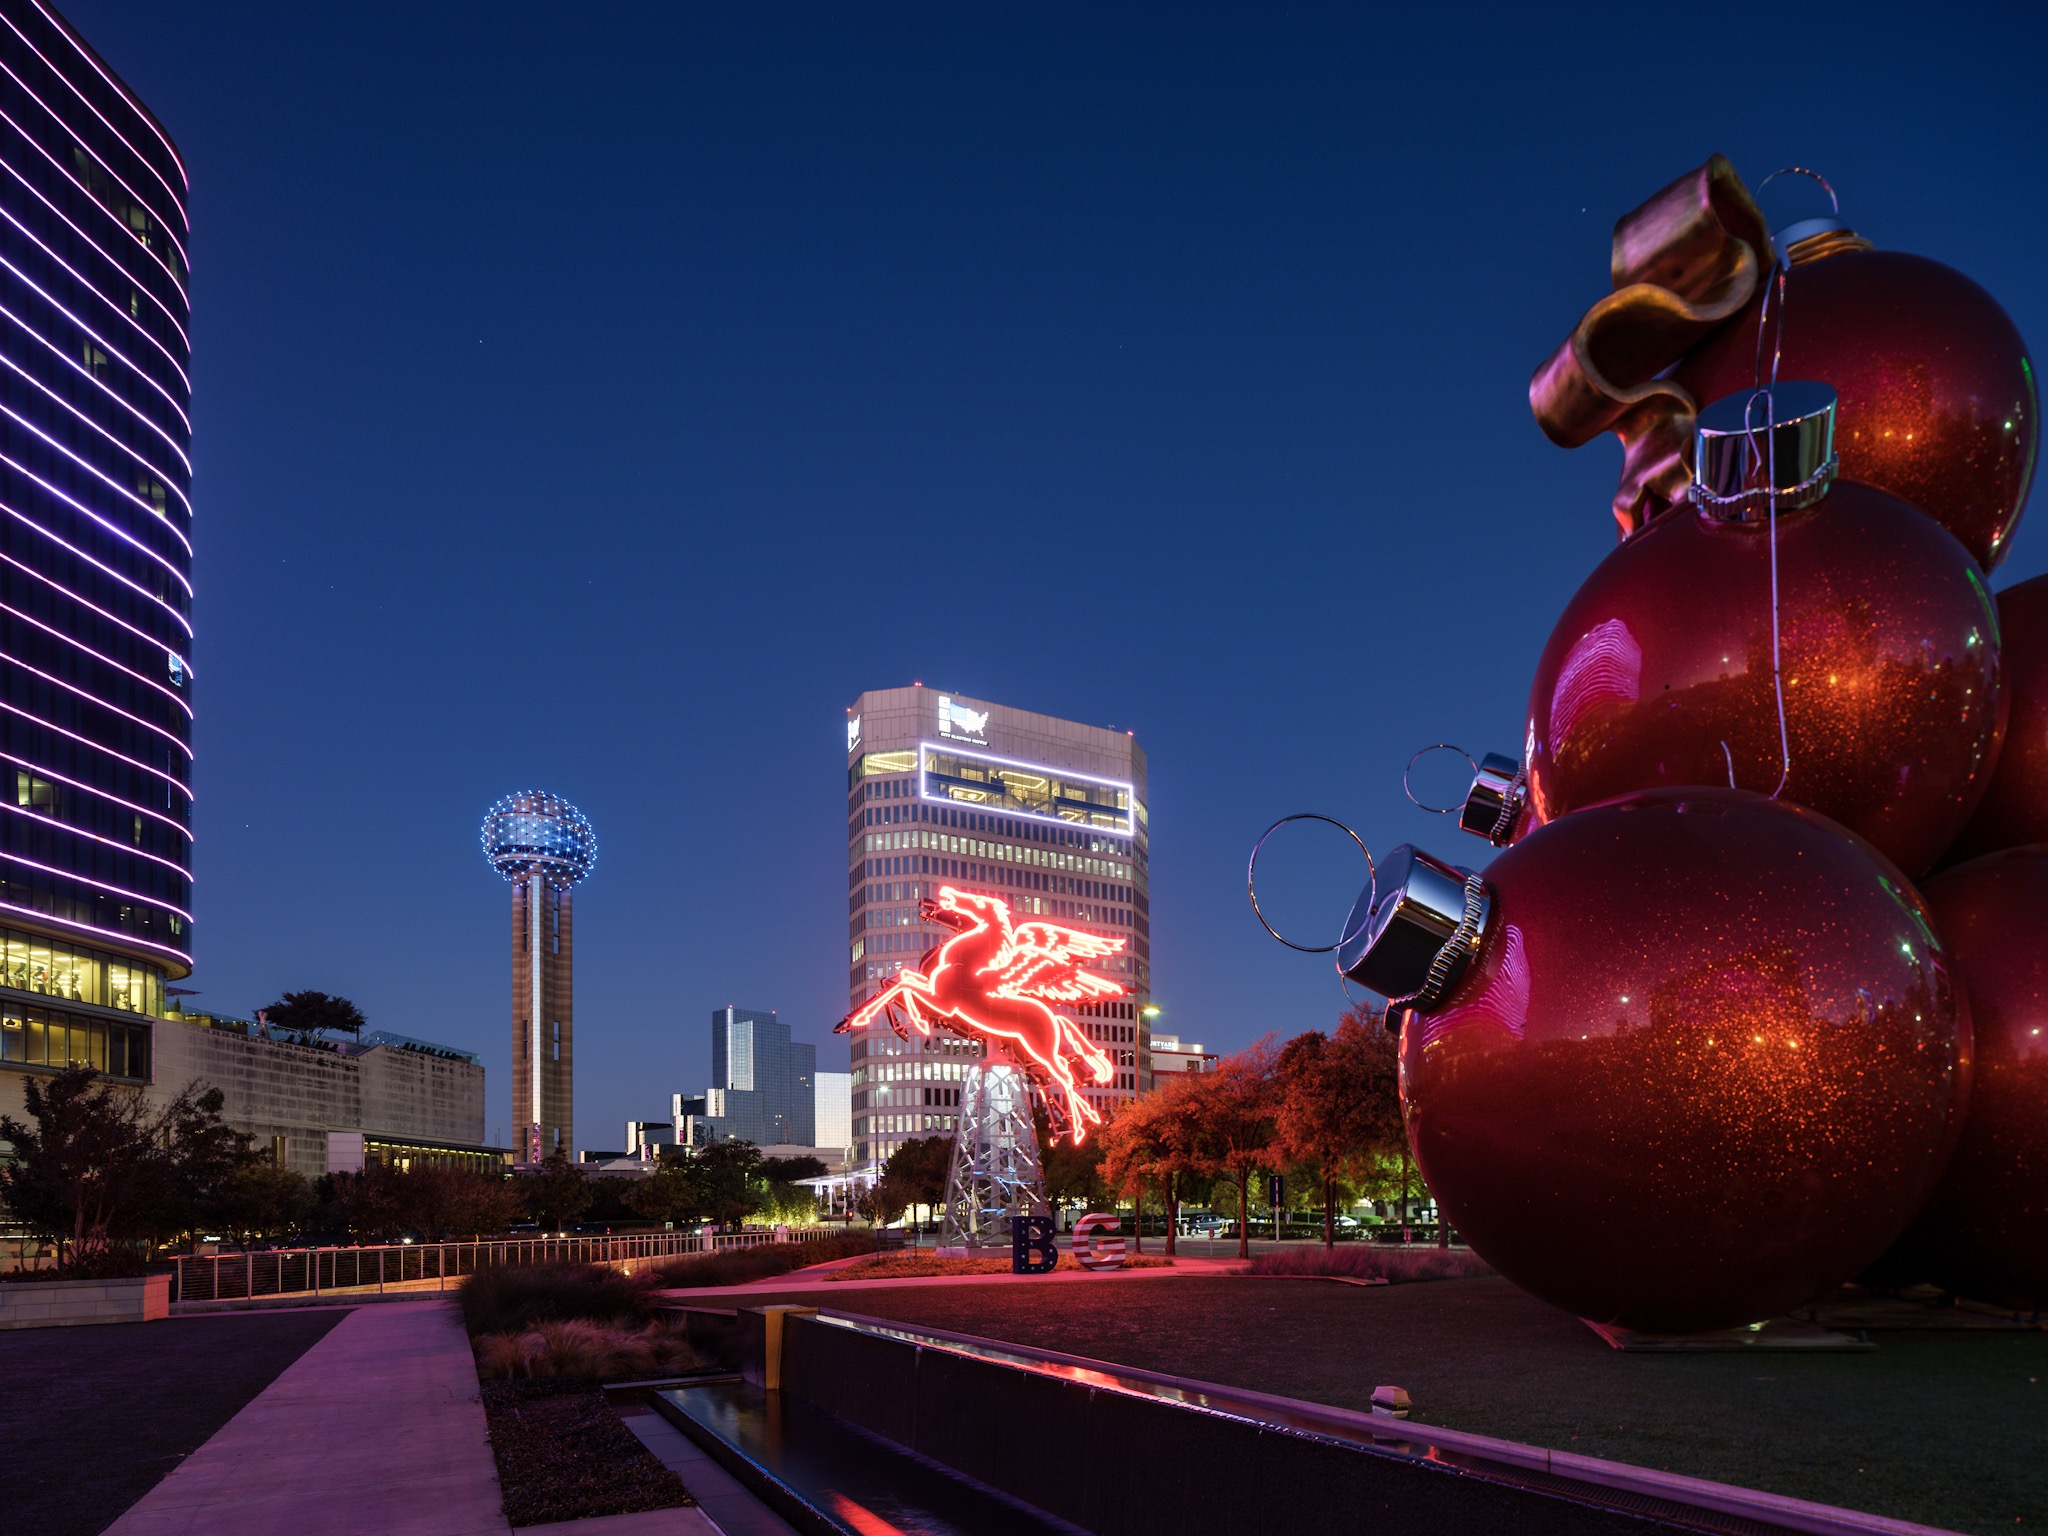 a large red ornaments in a city